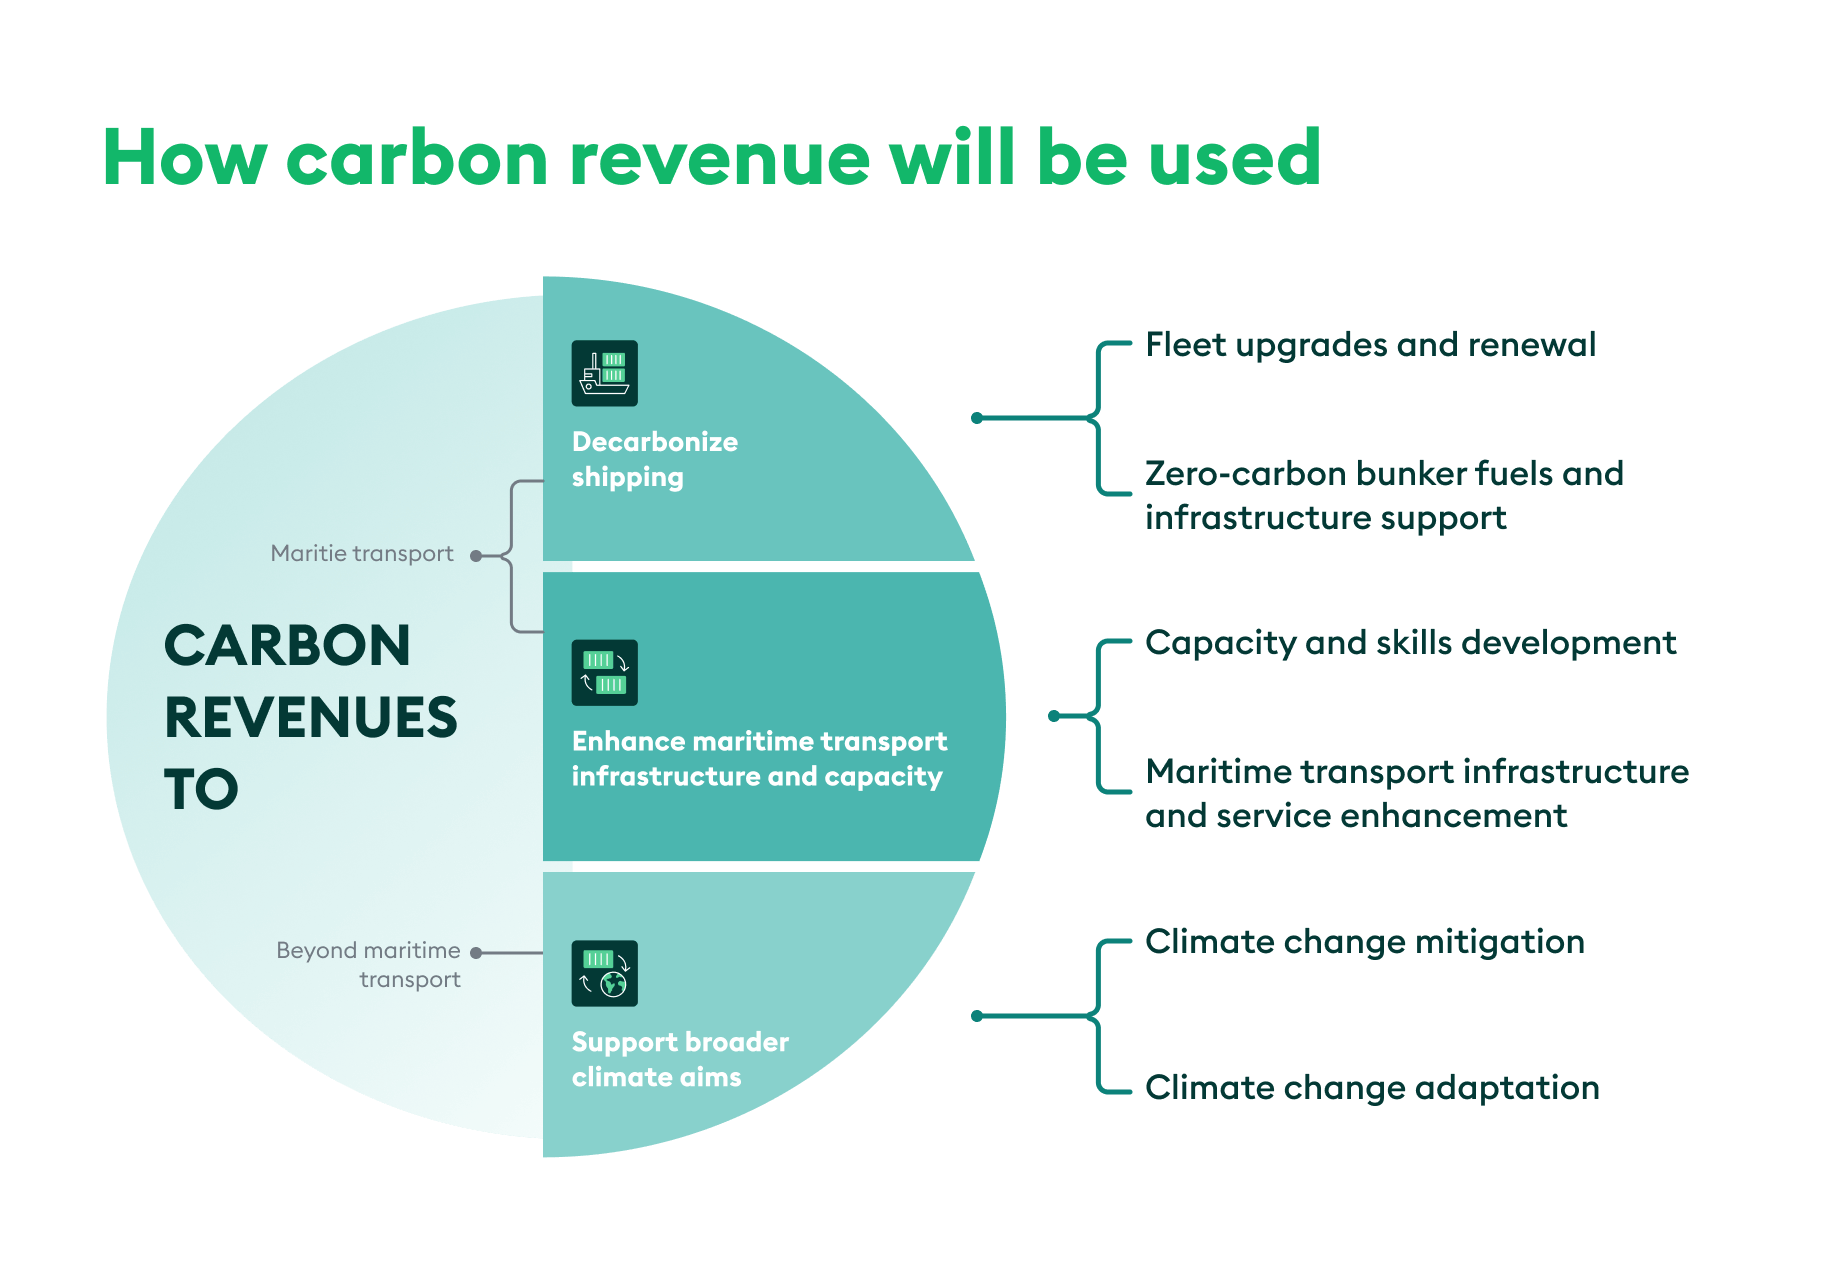 putting a price on carbon